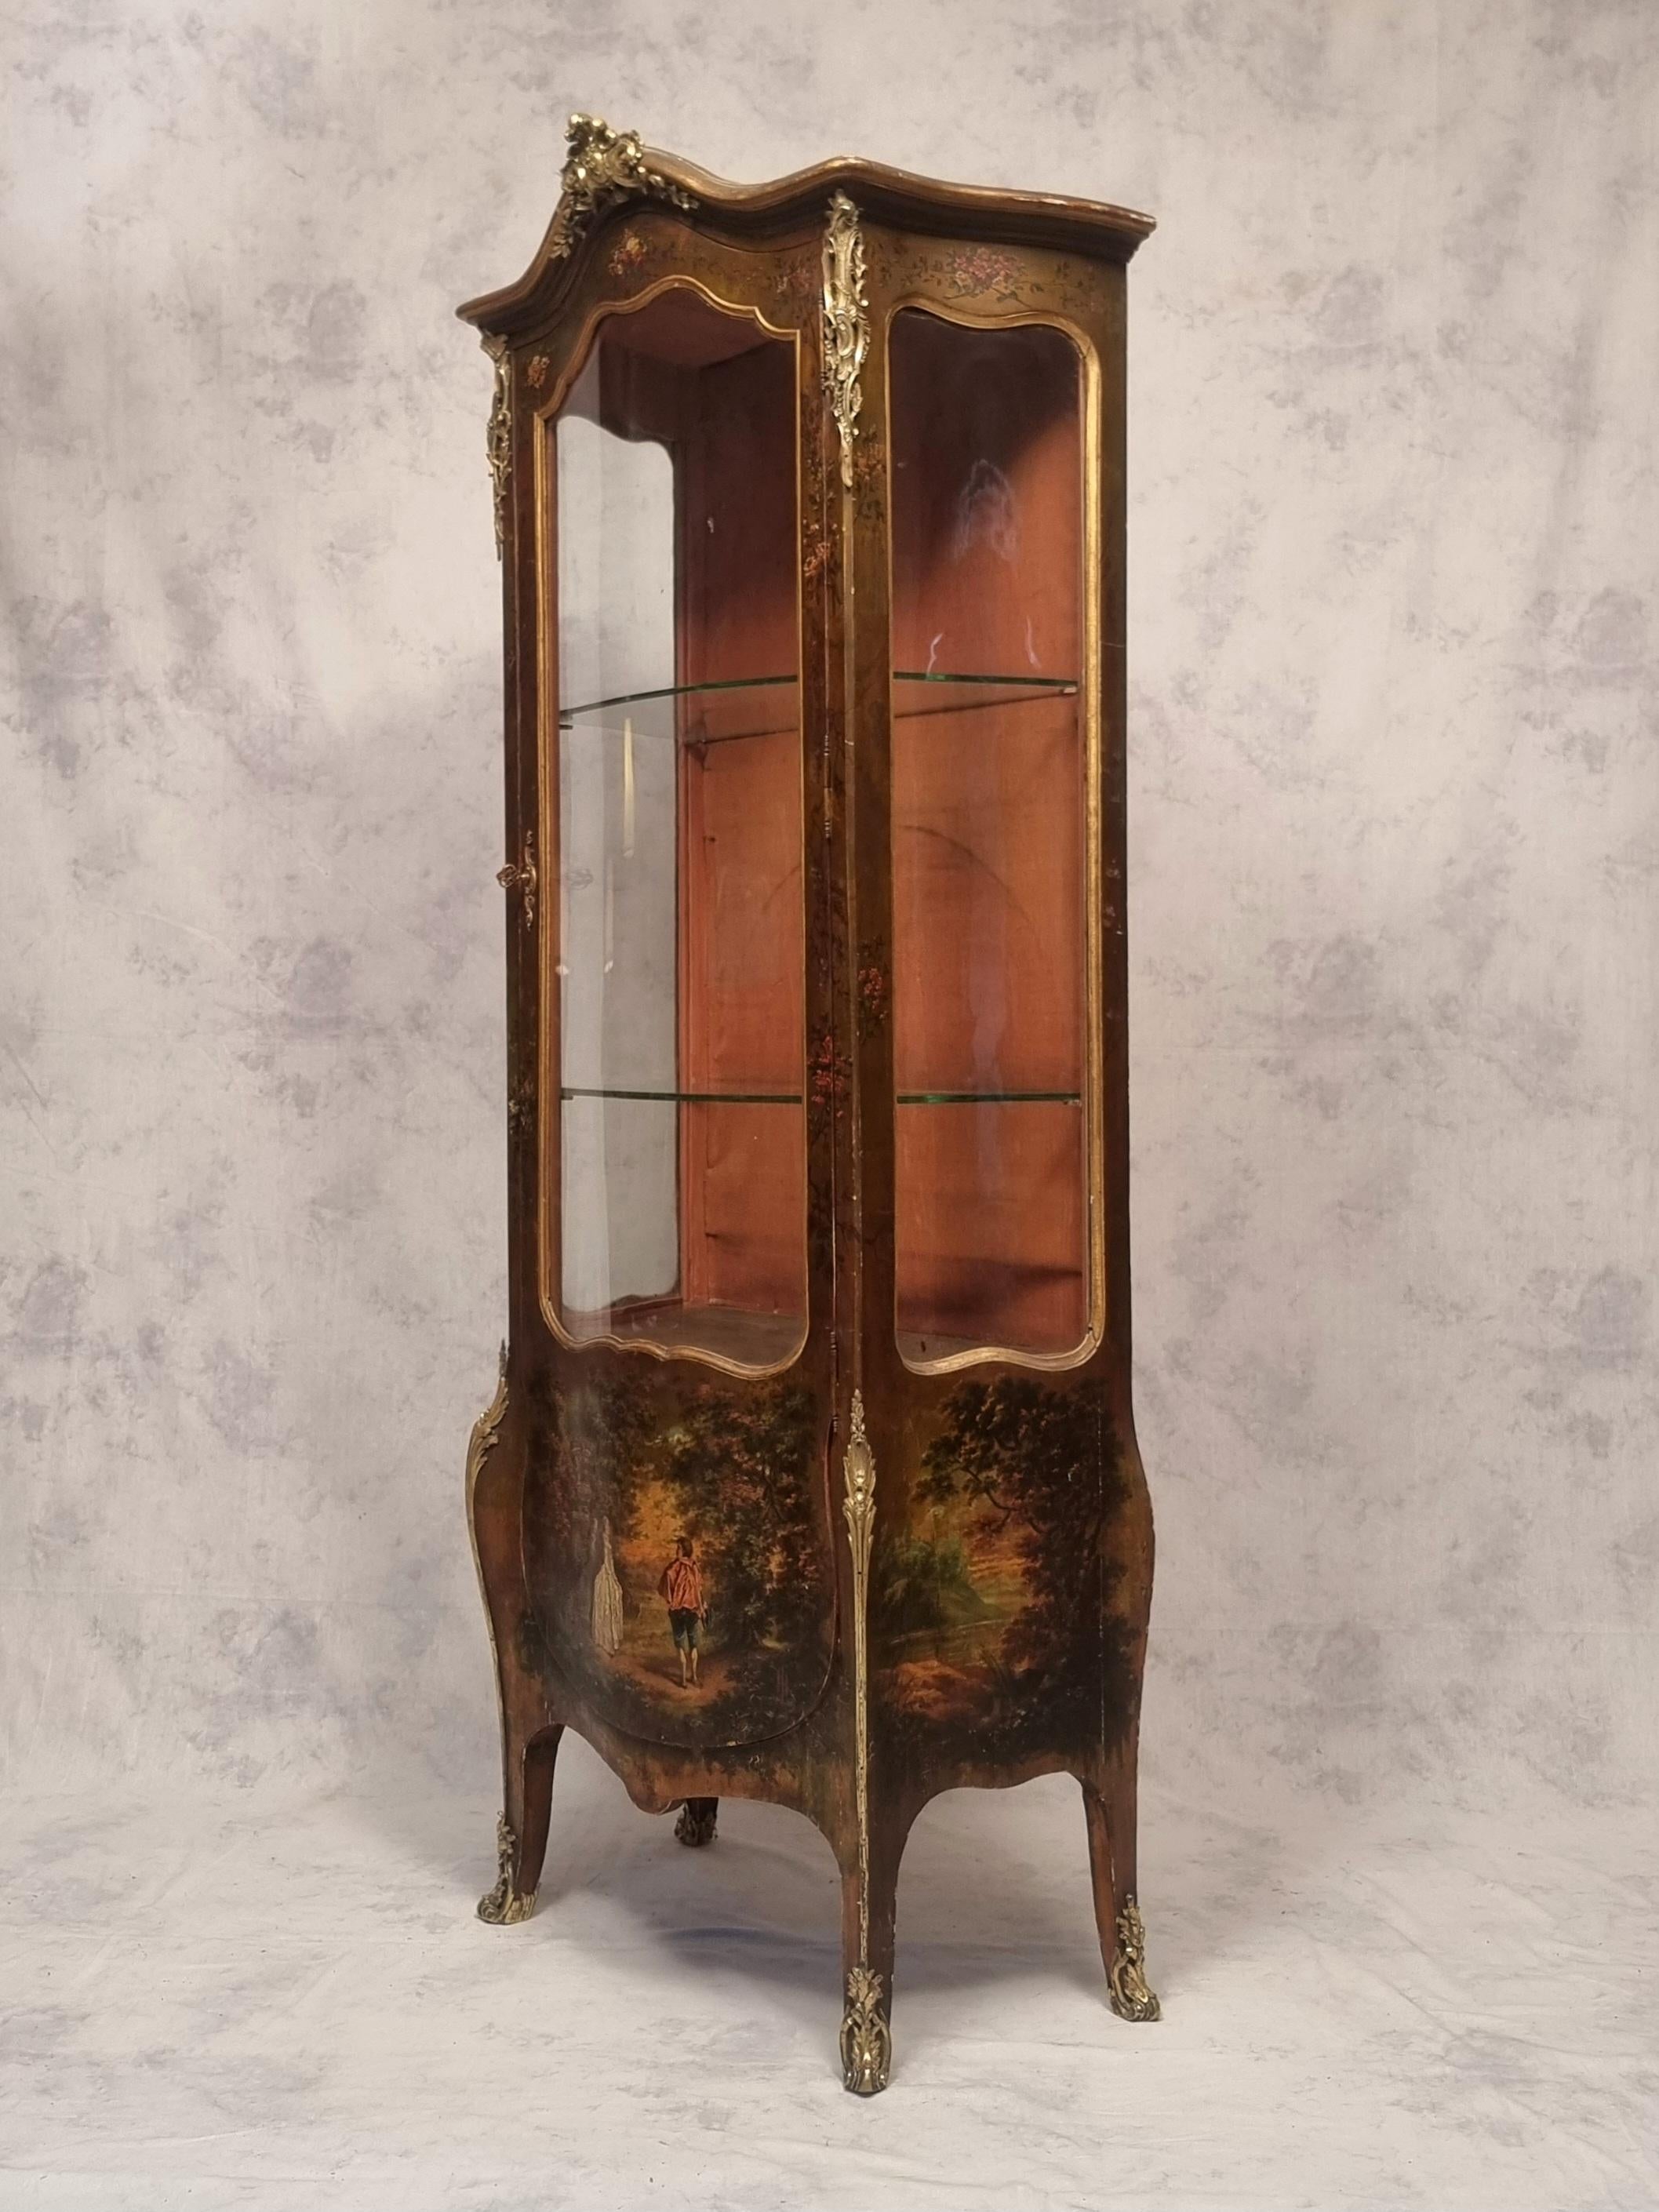 Showcase Domed Louis XV Style Napoleon III Period, Vernis Martin, 19th Century In Good Condition For Sale In SAINT-OUEN-SUR-SEINE, FR